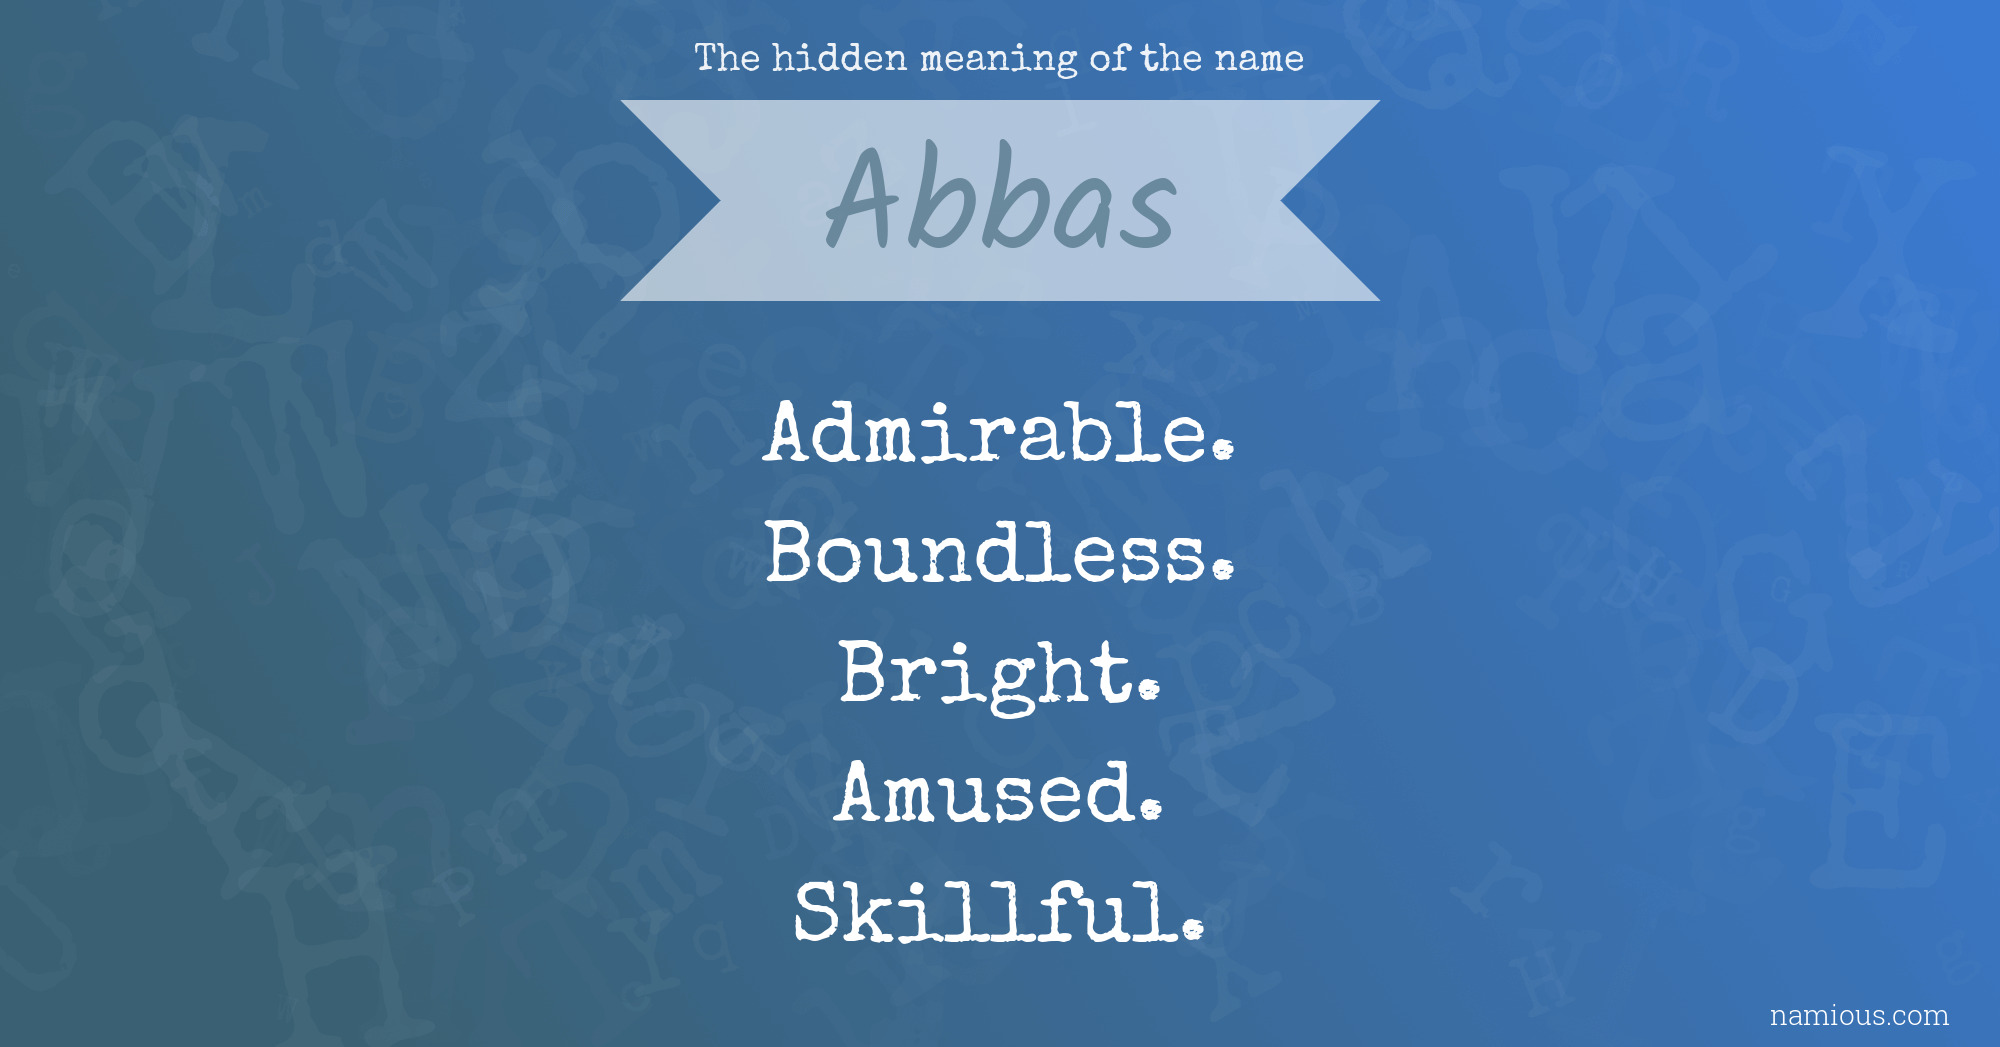 The hidden meaning of the name Abbas